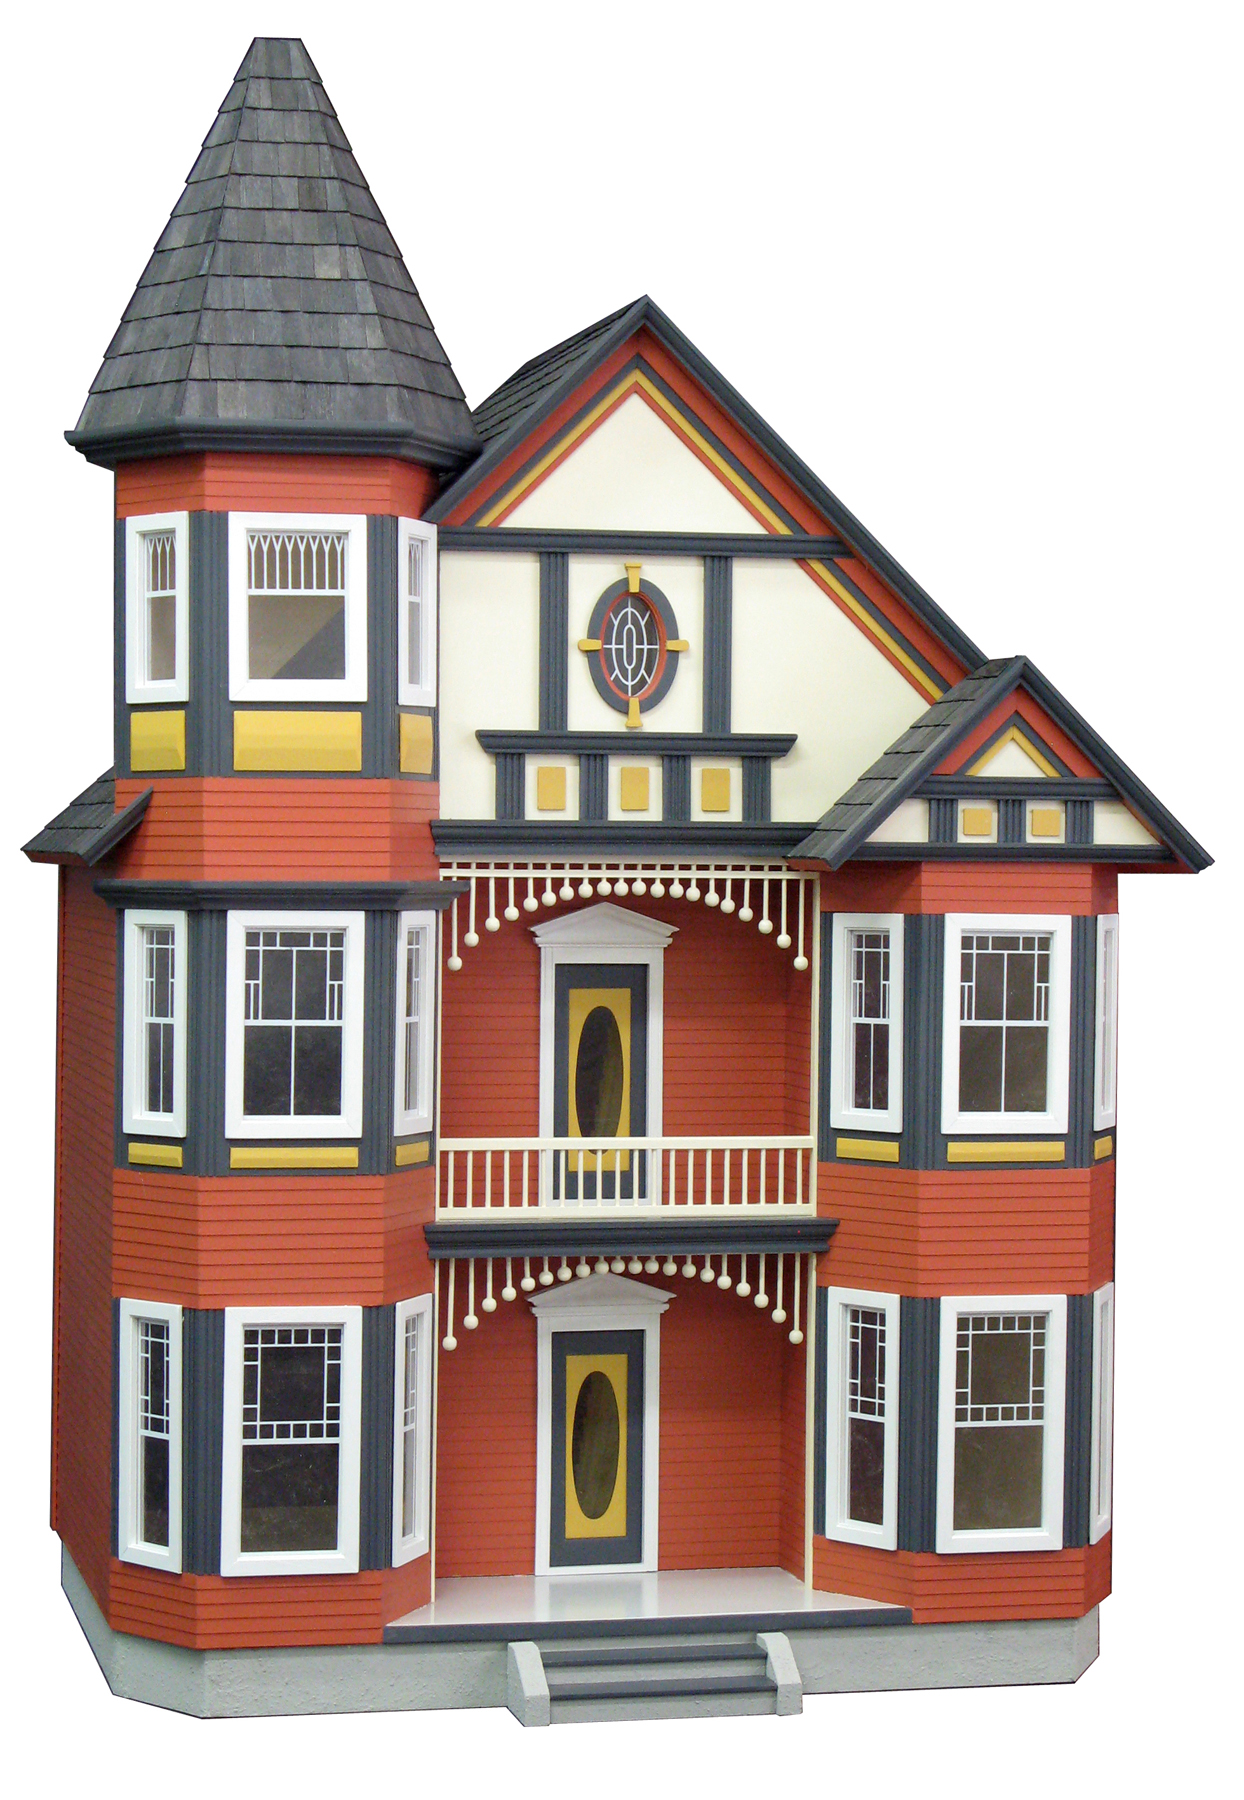 painted lady dollhouse